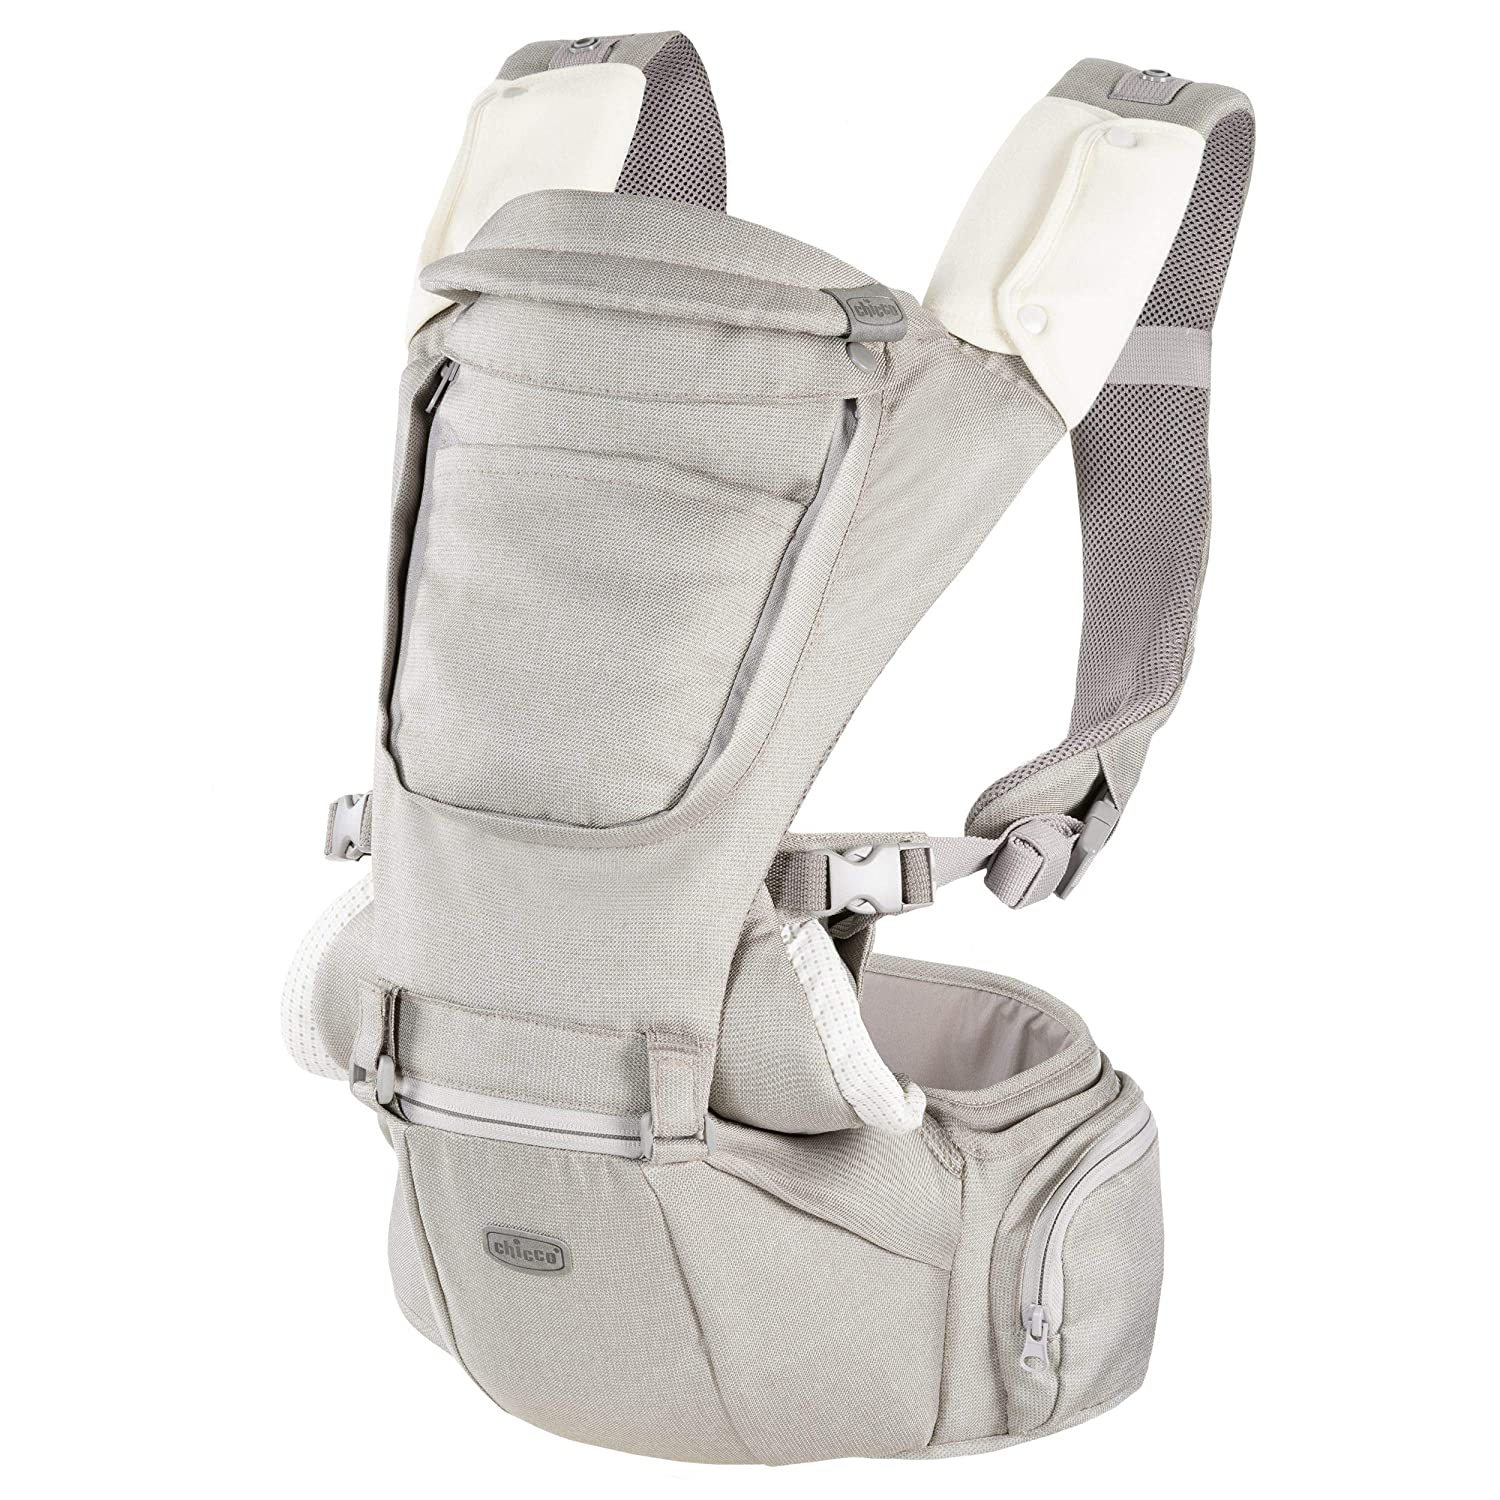 Chicco Hip Seat Ergonomic Baby Carrier for 0 Months to 15 kg, Multifunction